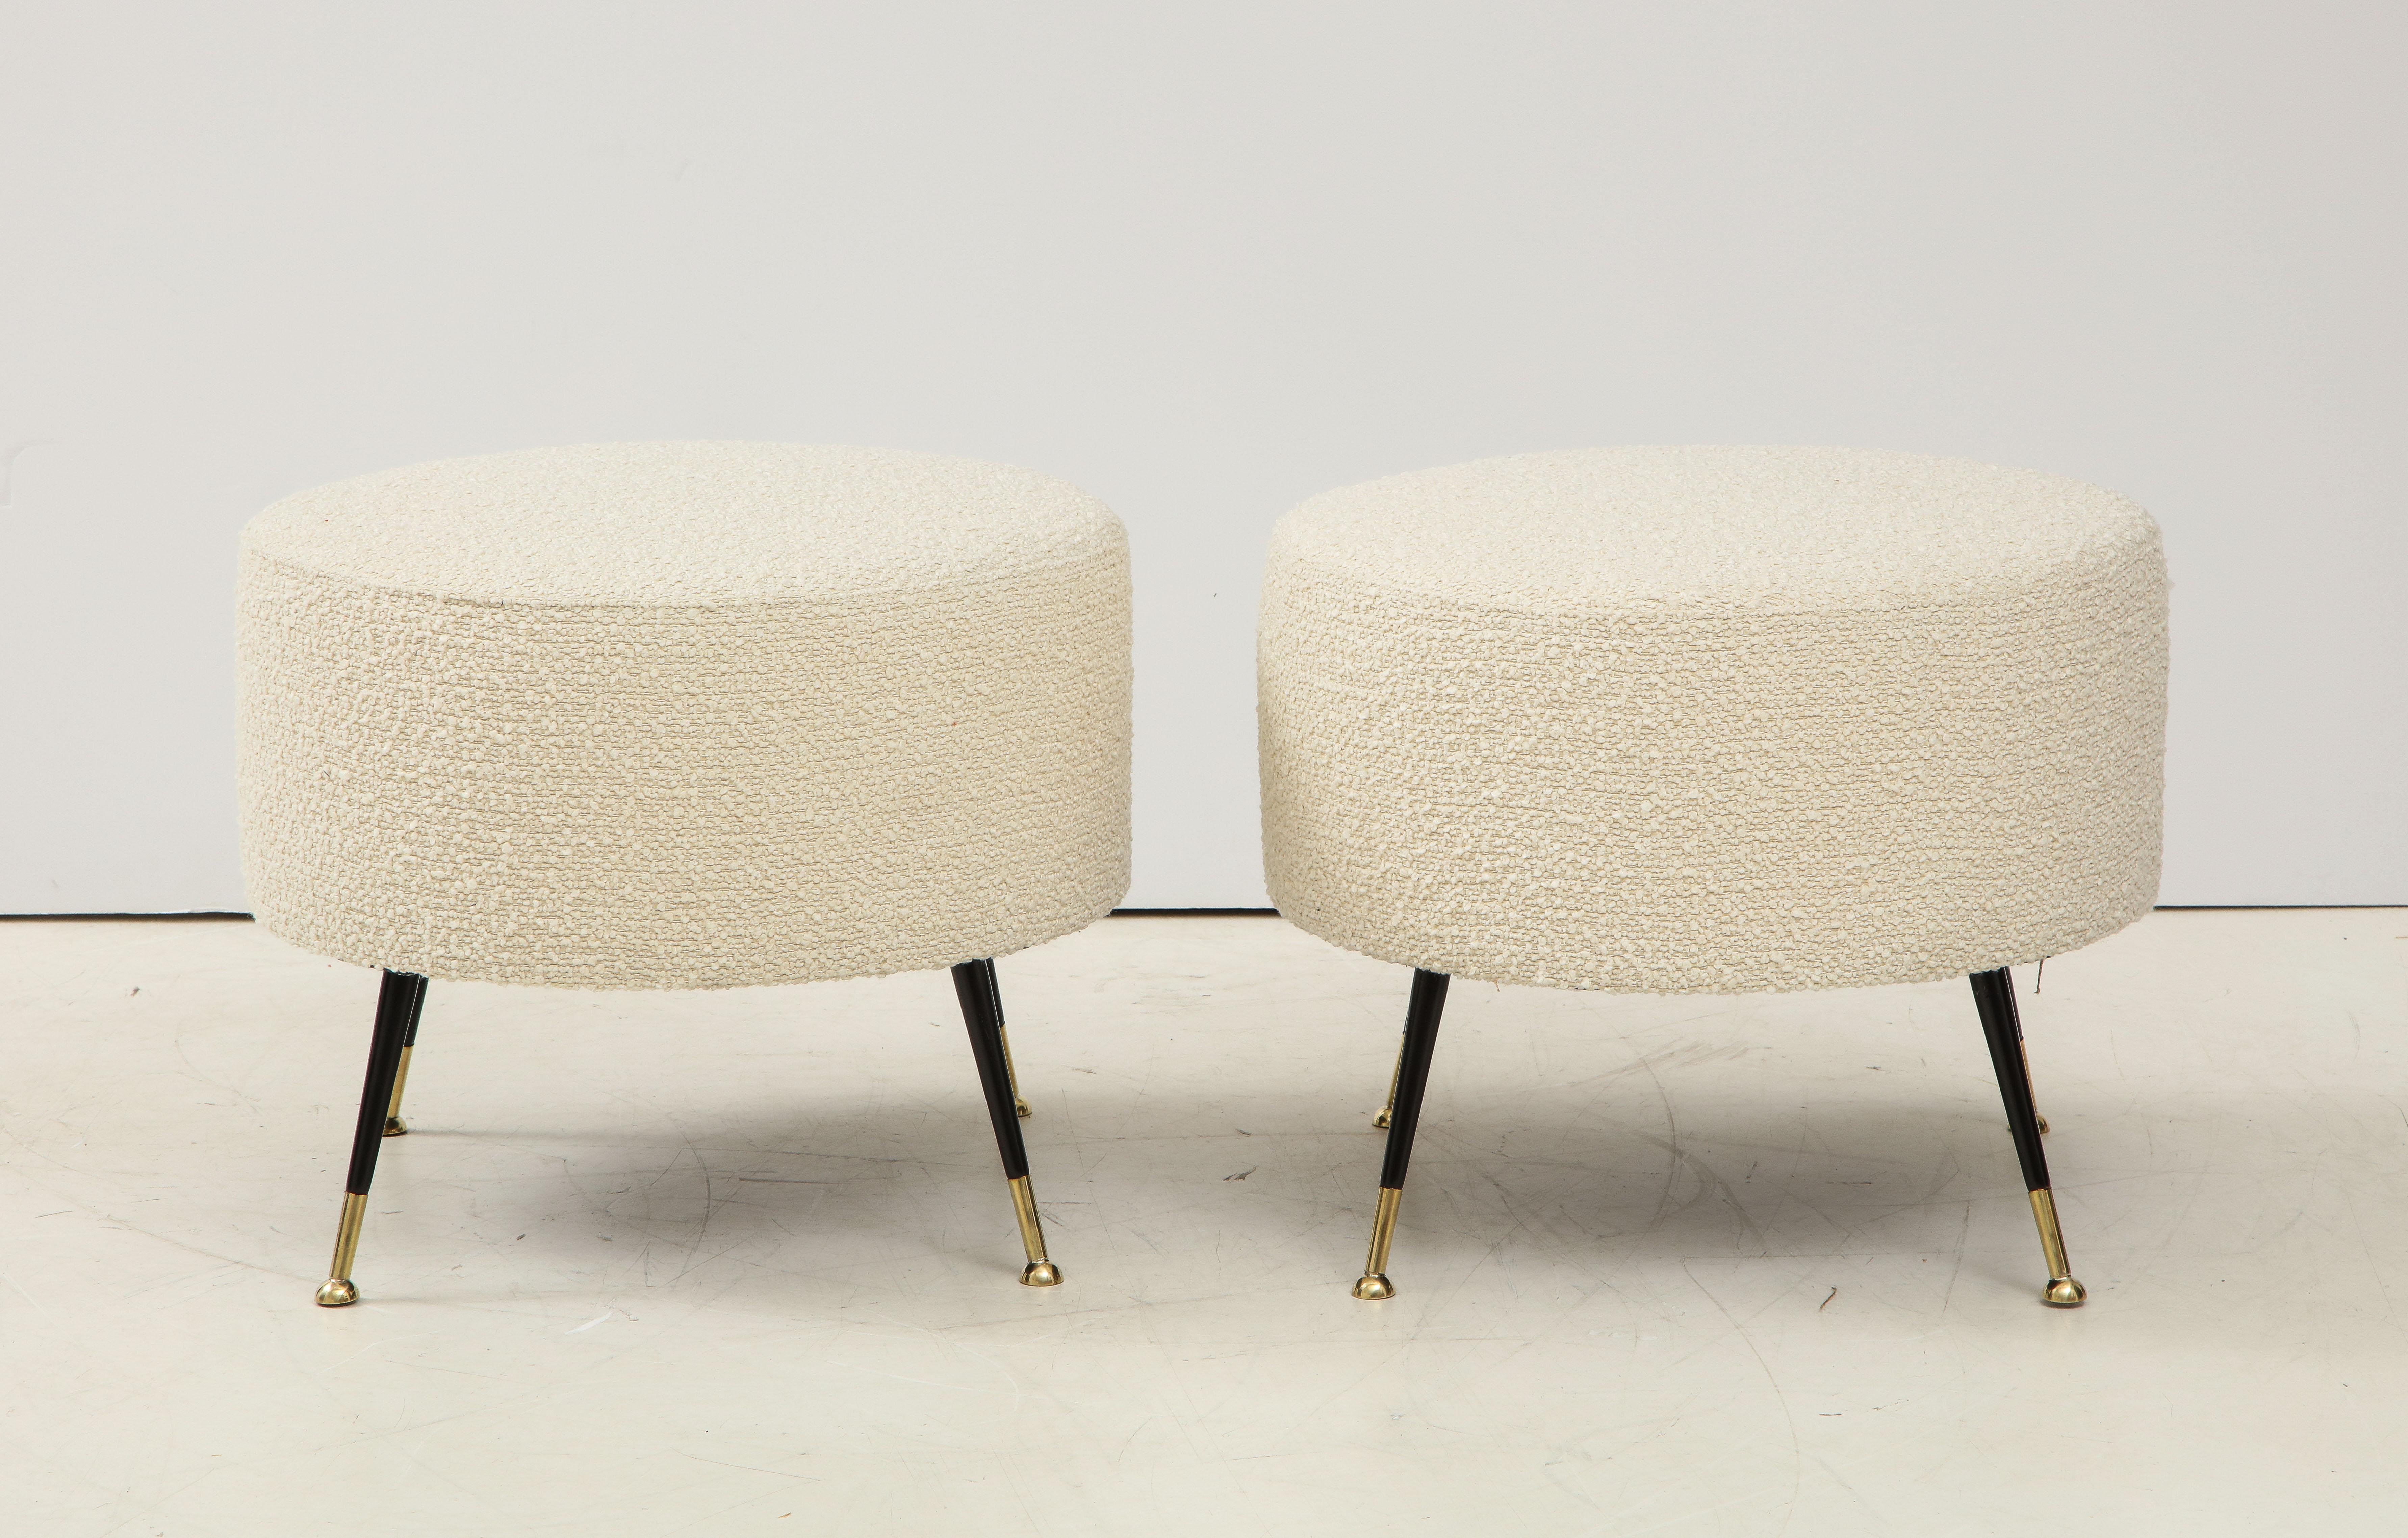 This pair of round stools or poufs were hand made in Florence, Italy, by a master furniture artisan. Round seats in imported Ivory Boucle fabric with black enamel and brass legs. This pair of stools or poufs are on display at the Gallery at 200 Lex